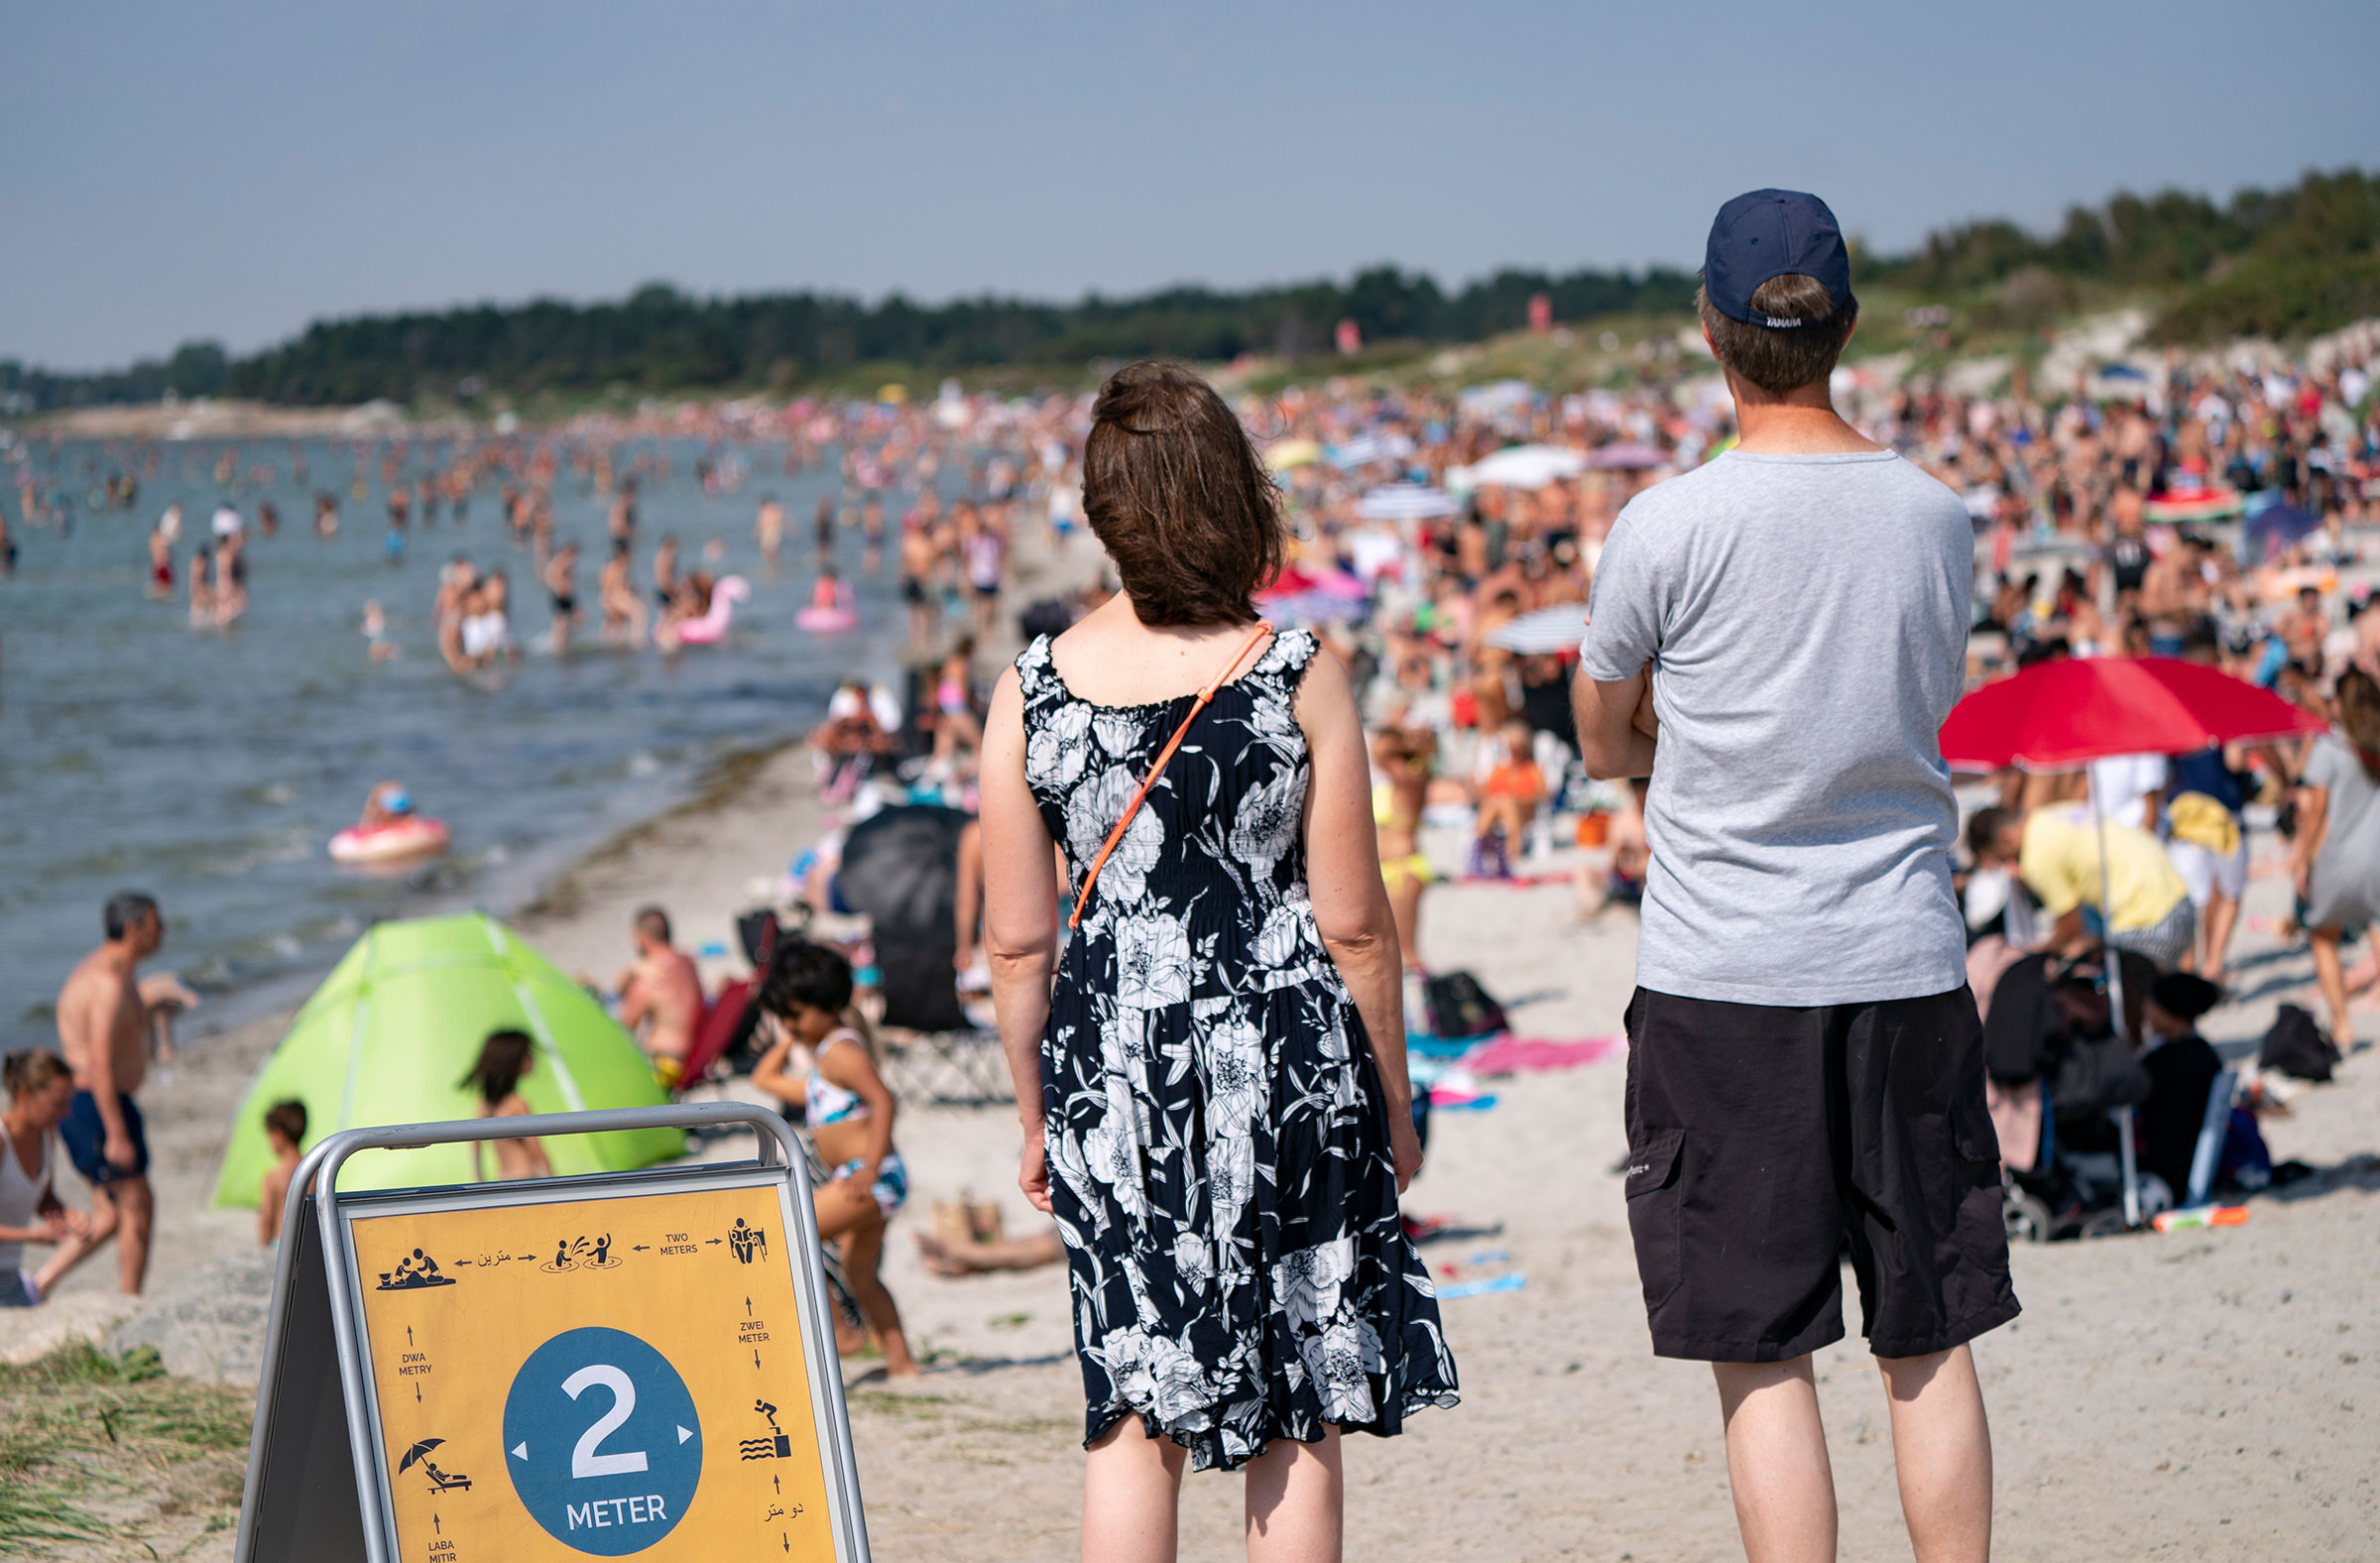 People on a crowded beach in Lomma, Sweden on Aug. 16, 2020.